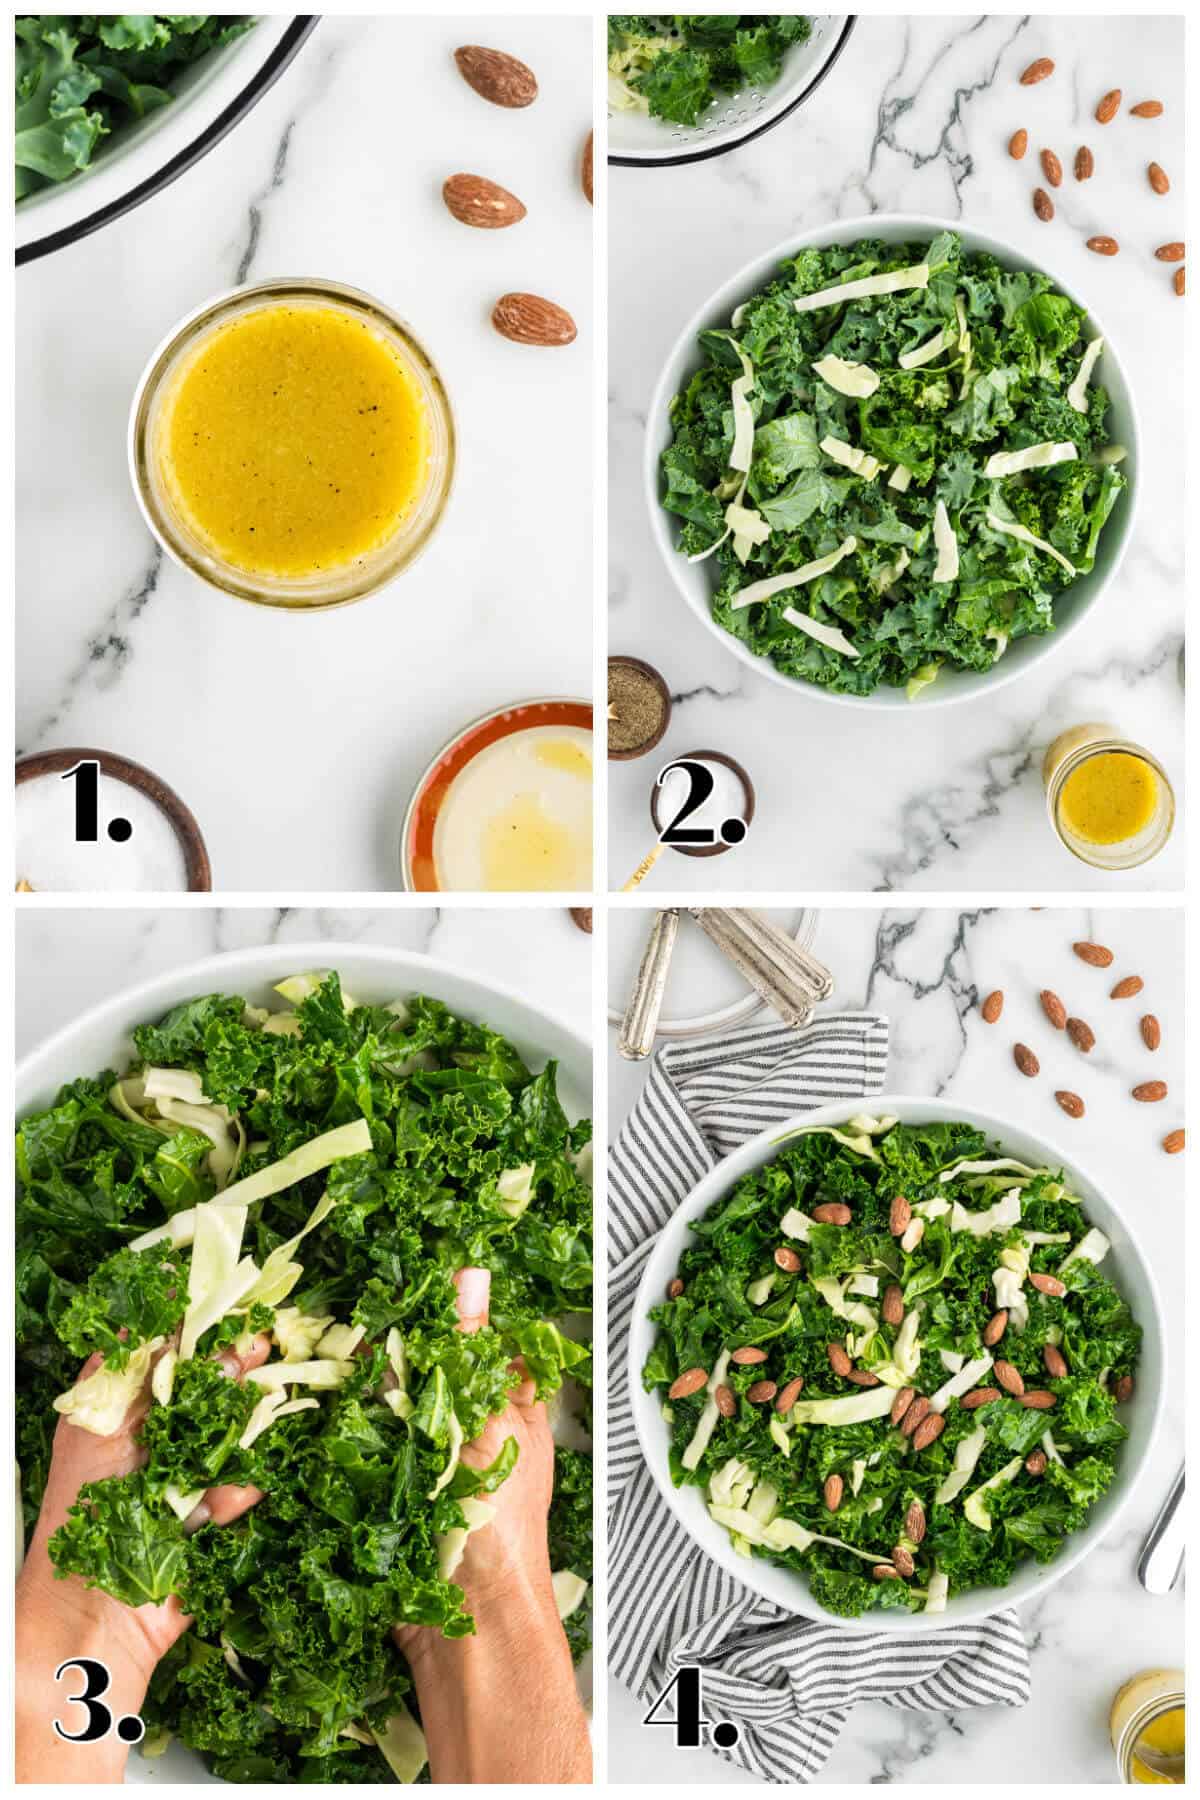 Collage of 4 photos showing the steps to make Kale Crunch Salad at home.